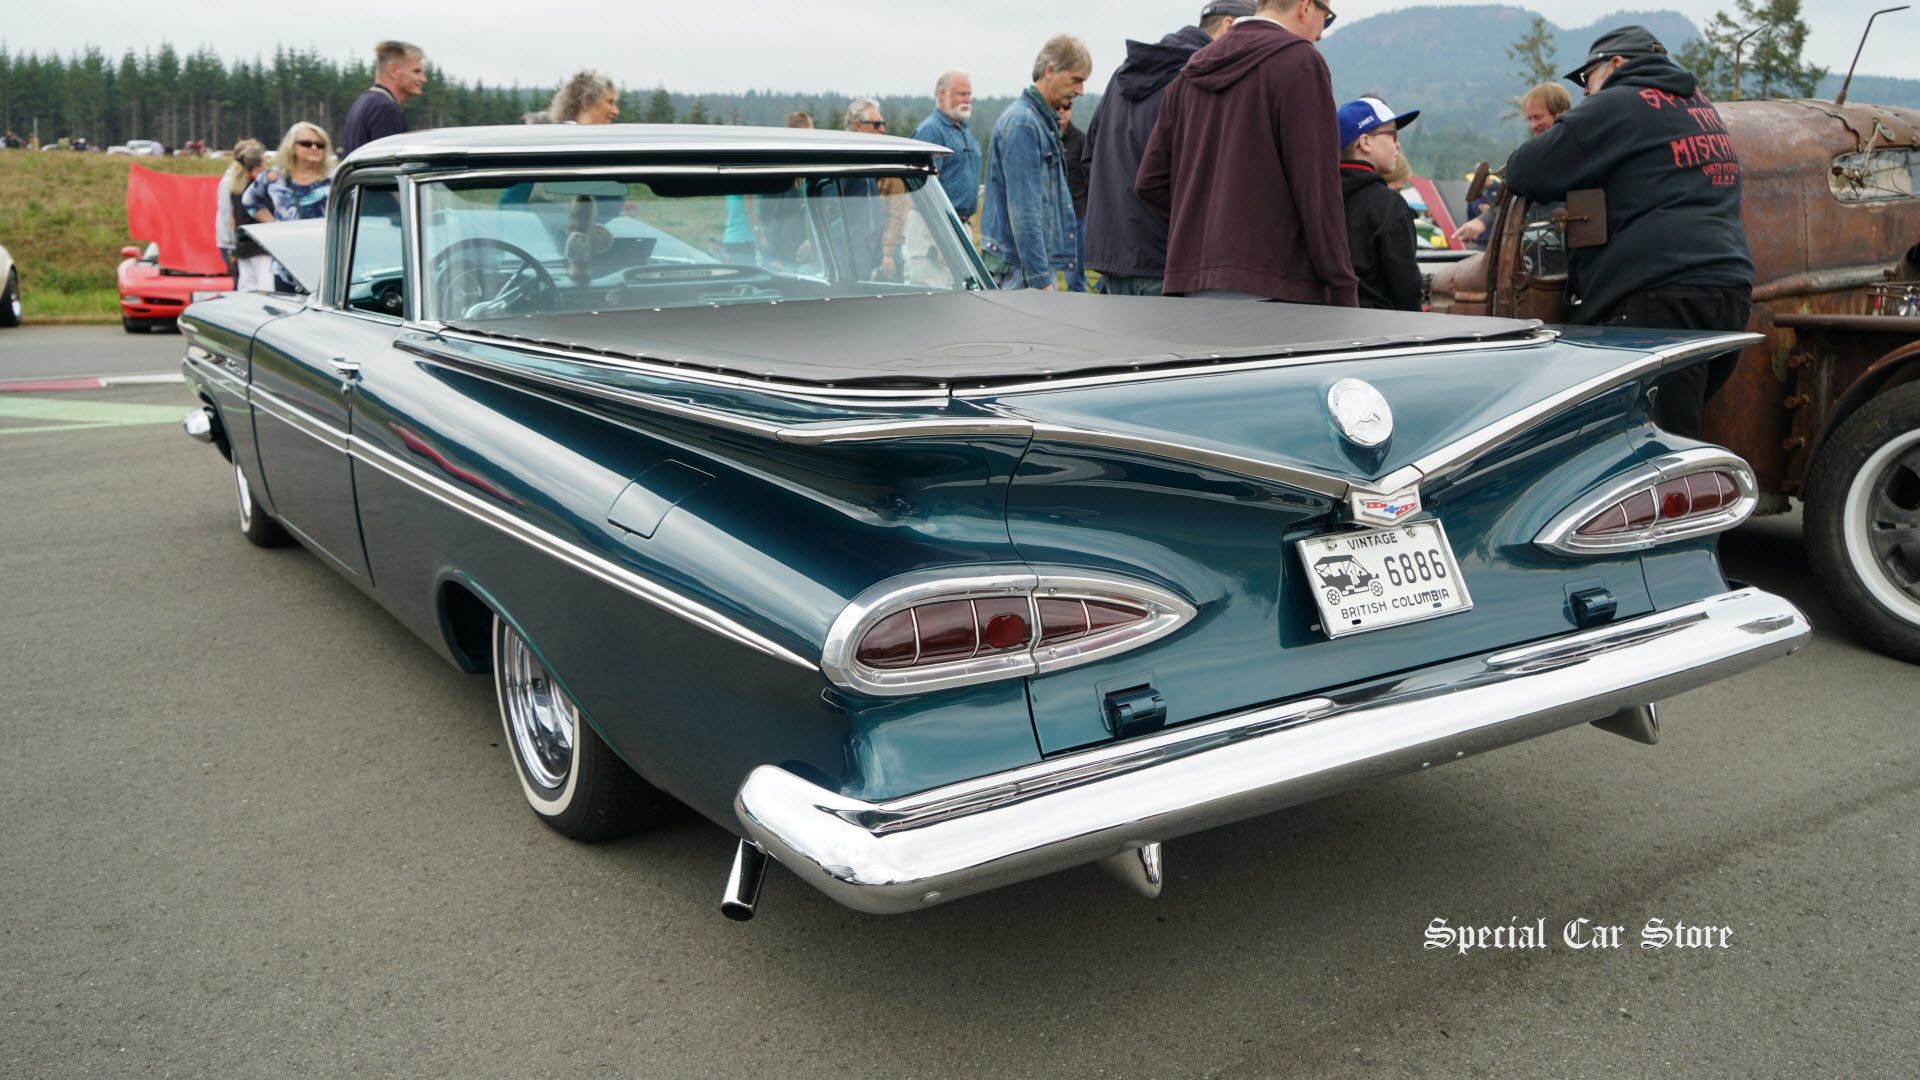 1920x1080 1959 Chevrolet El Camino at Vancouver Island Motor Gathering 2018  http://specialcarstore.